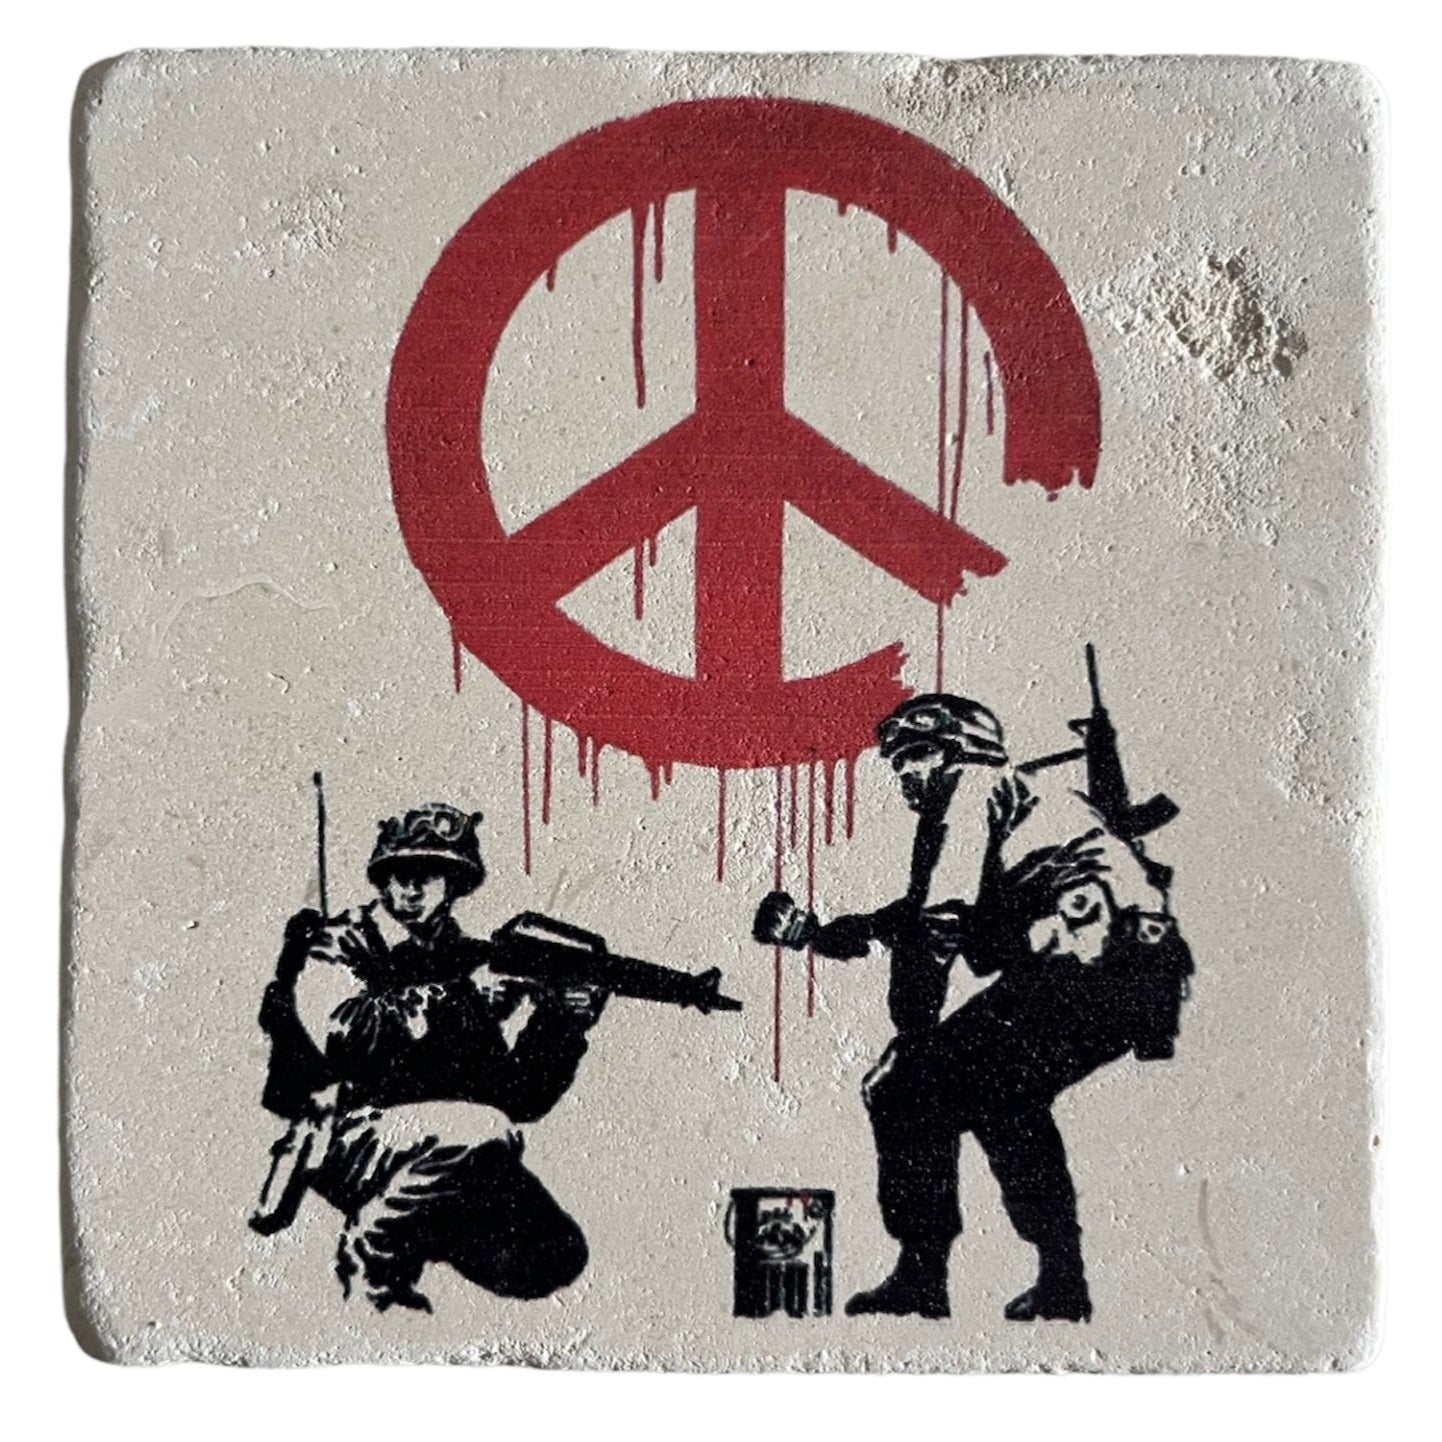 BANKSY *Peace Soldiers* Screenprint on Stone Limited Edition